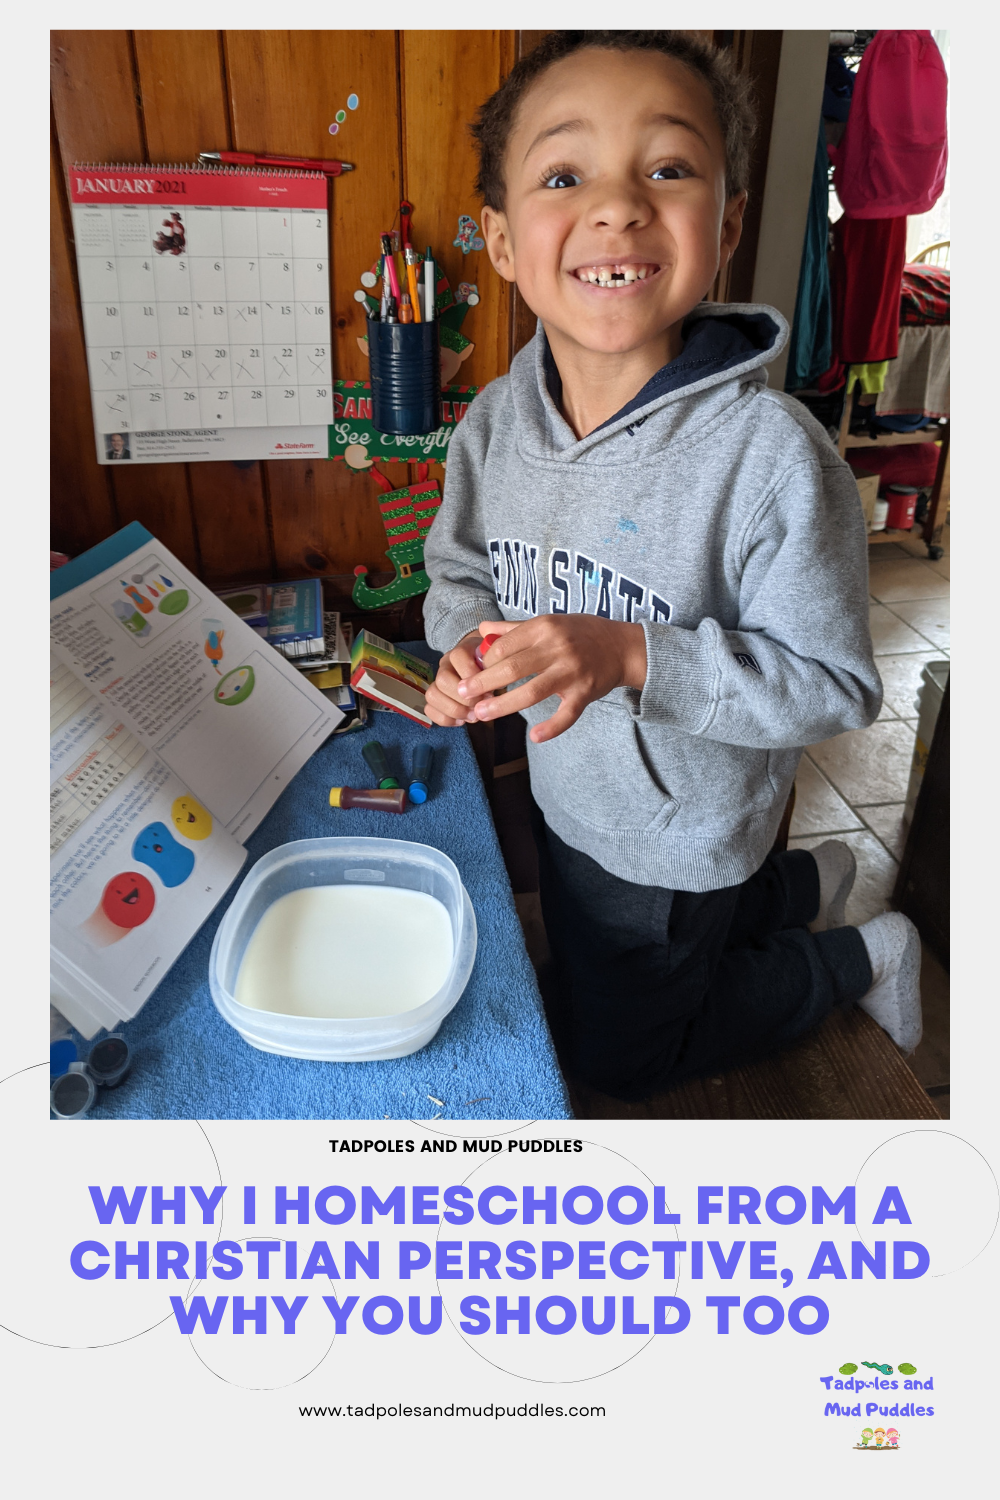 Why I homeschool from a christian perspecitve, and why you should too